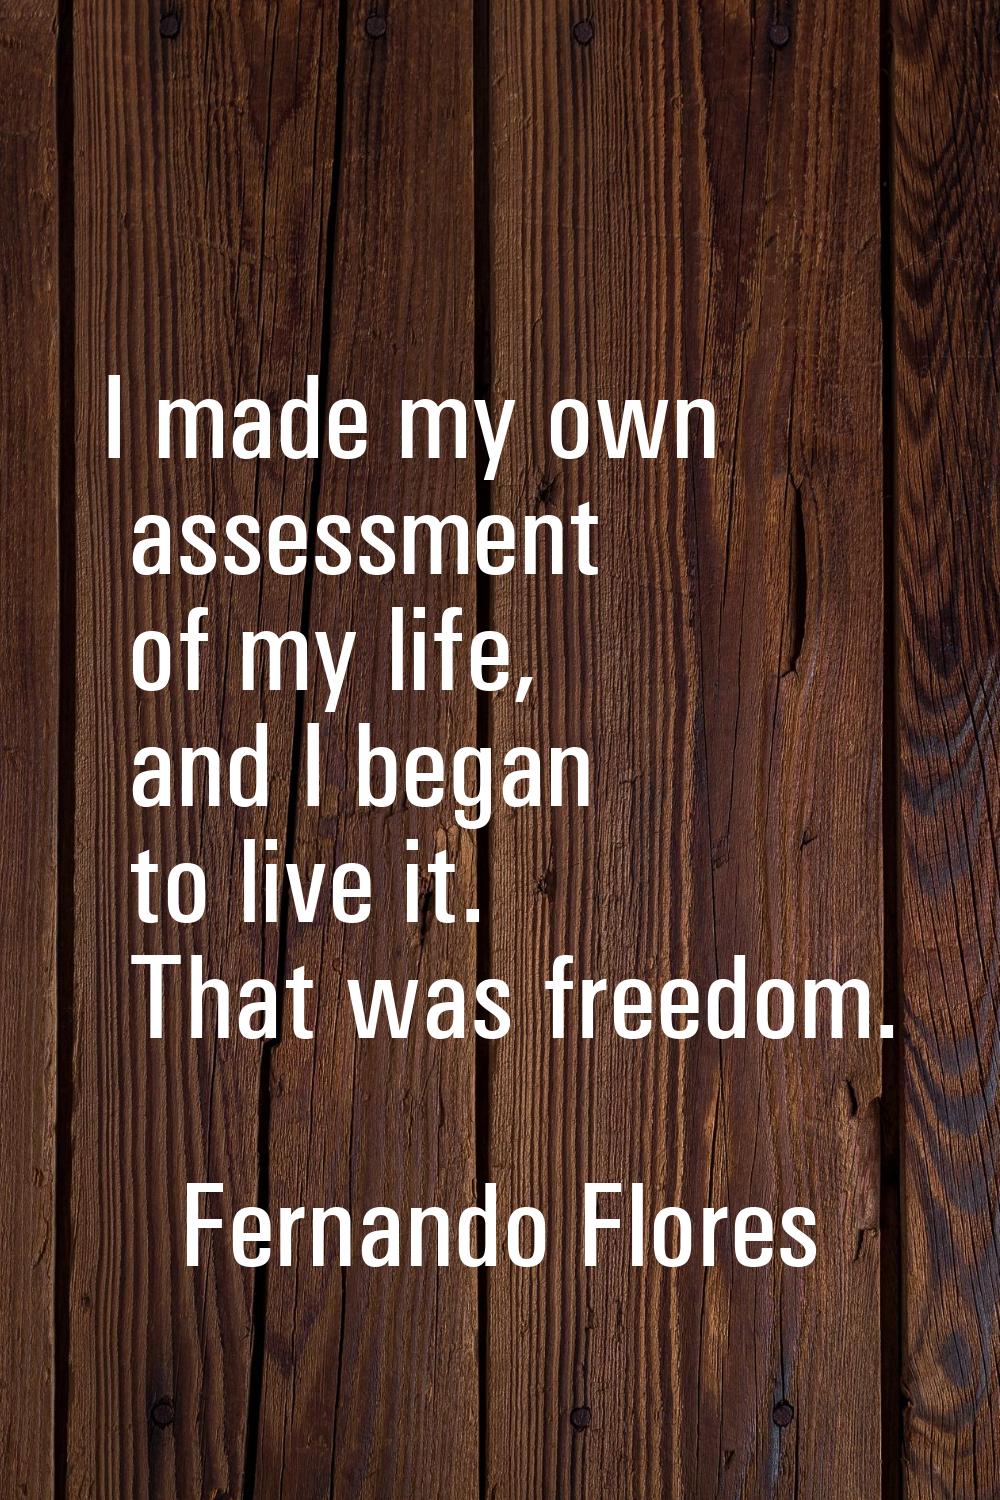 I made my own assessment of my life, and I began to live it. That was freedom.